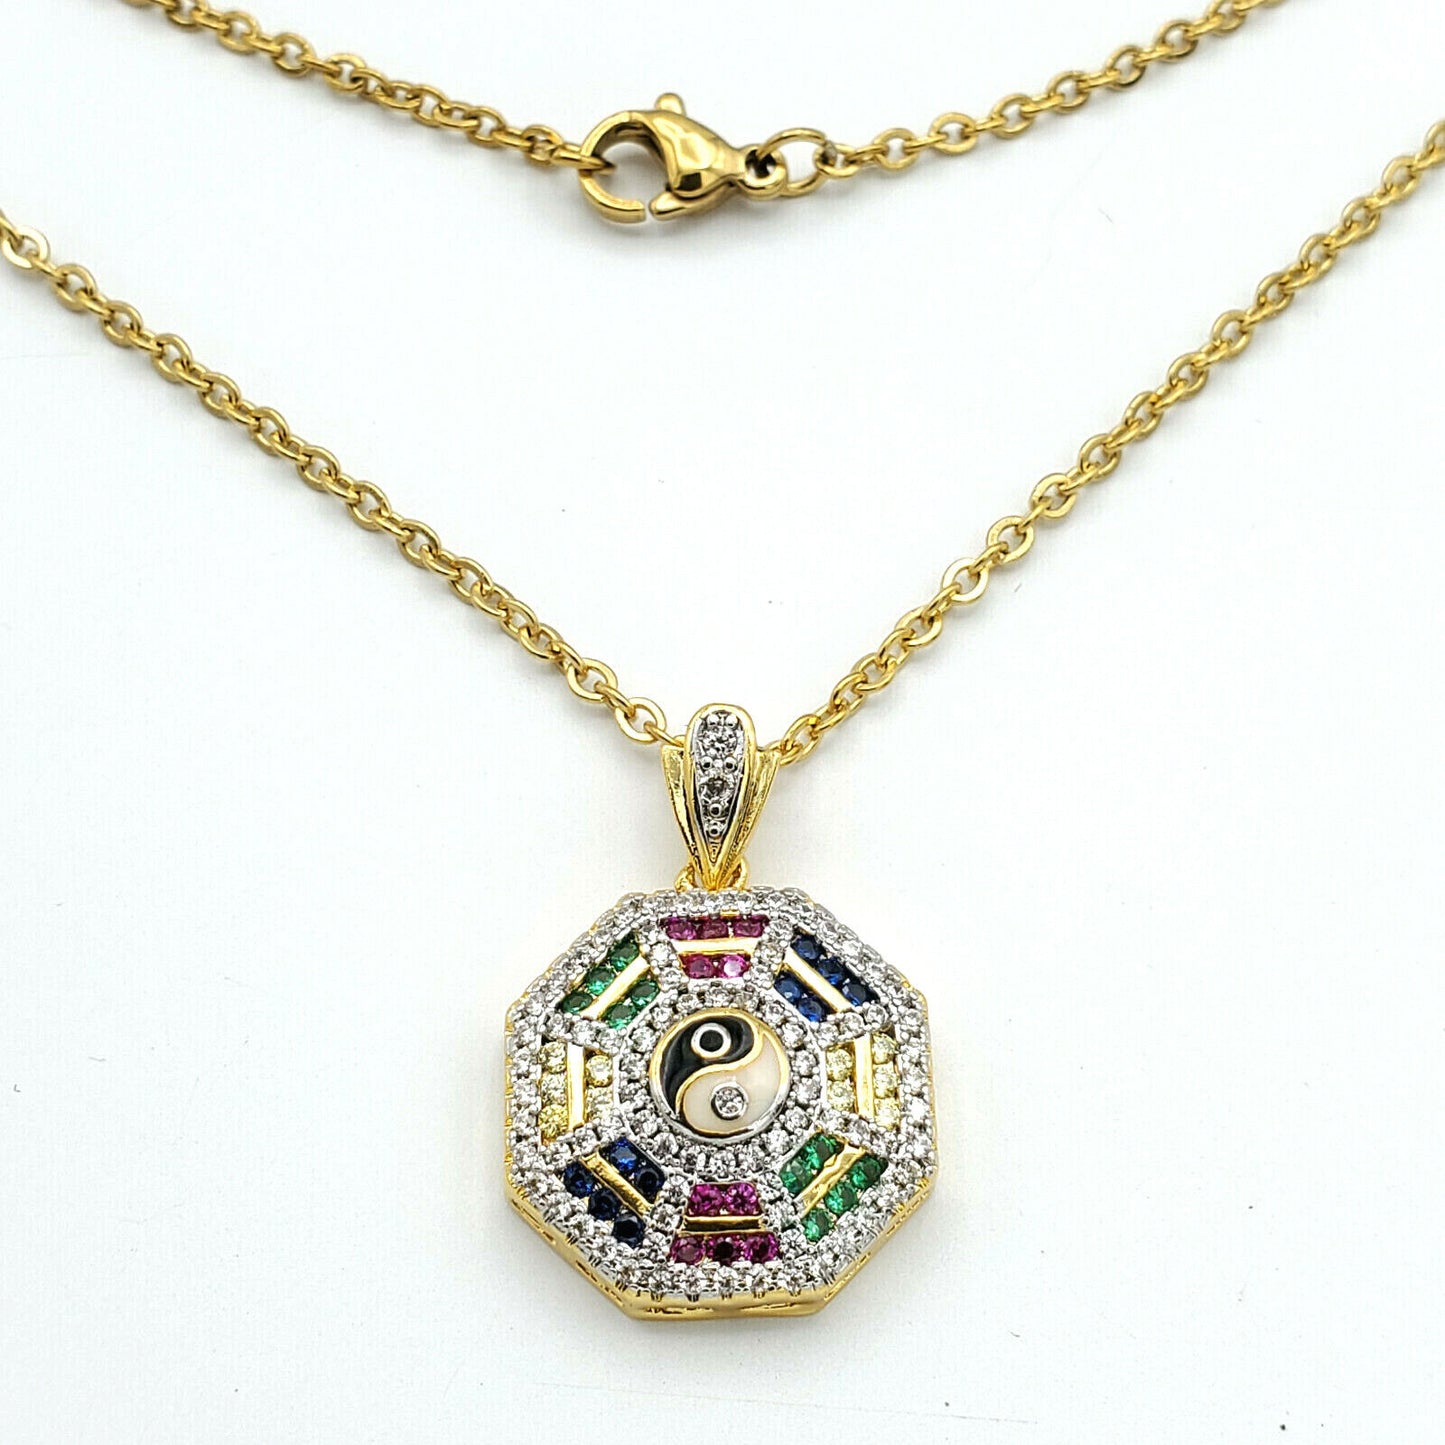 Necklaces - 24K Gold Plated. Cubic Zirconia Yin Yang Eight Diagrams Pendant & Chain.